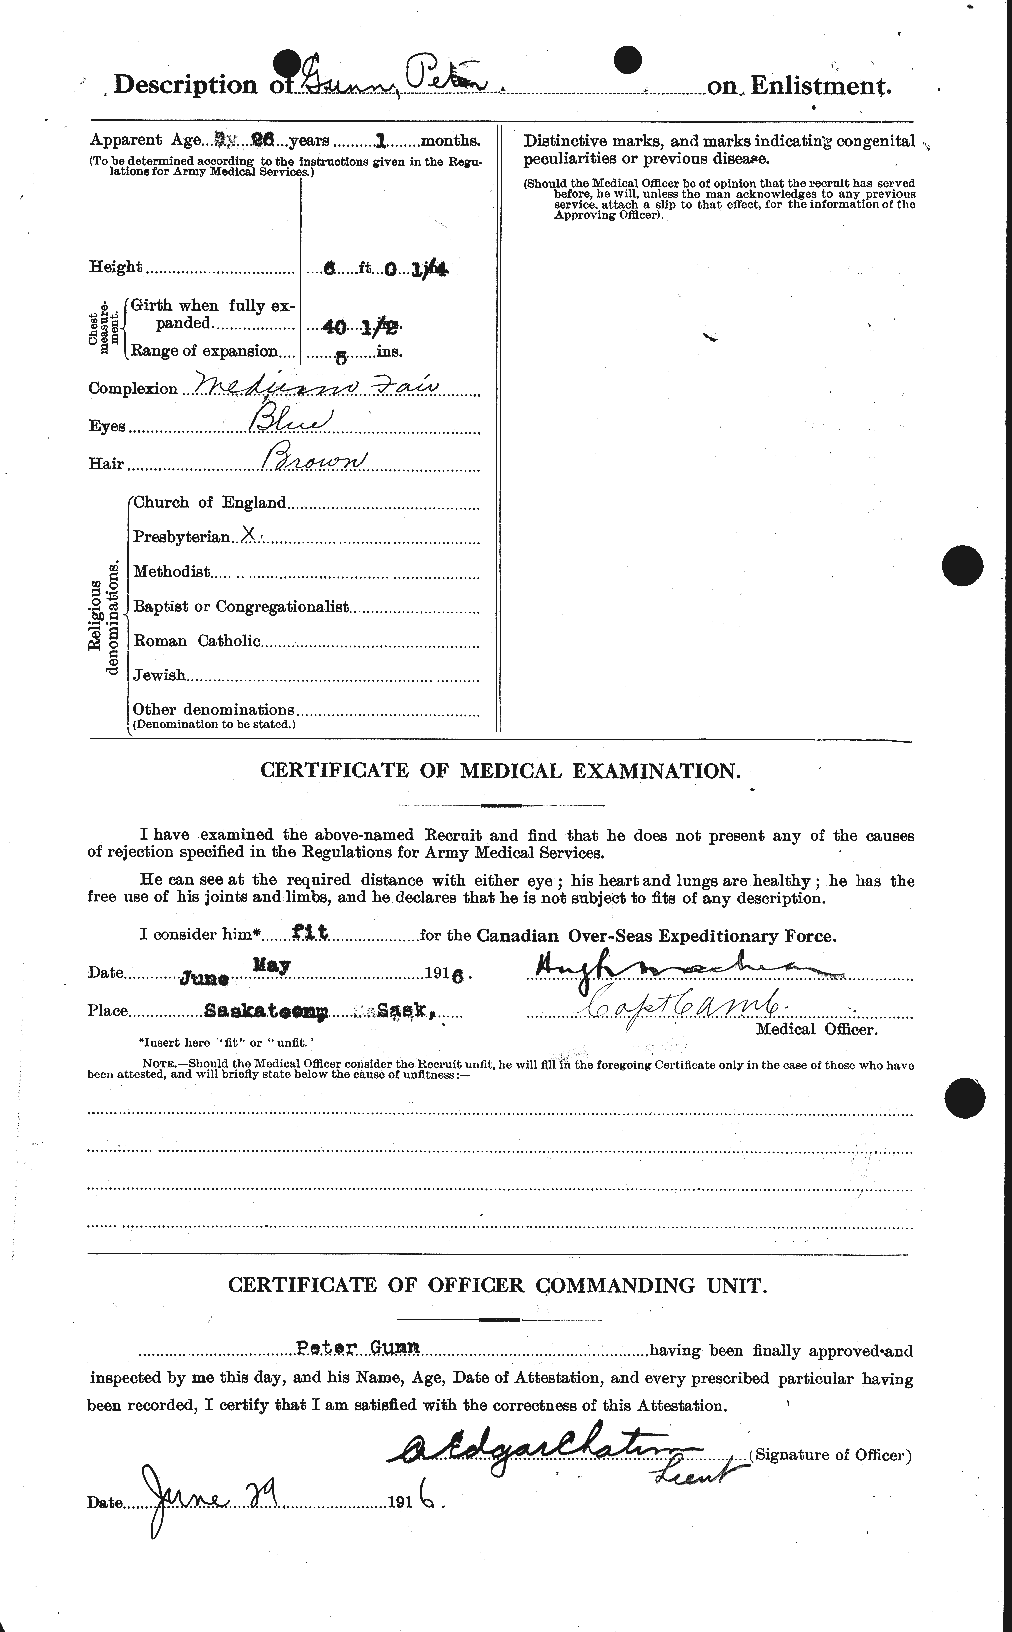 Personnel Records of the First World War - CEF 369319b